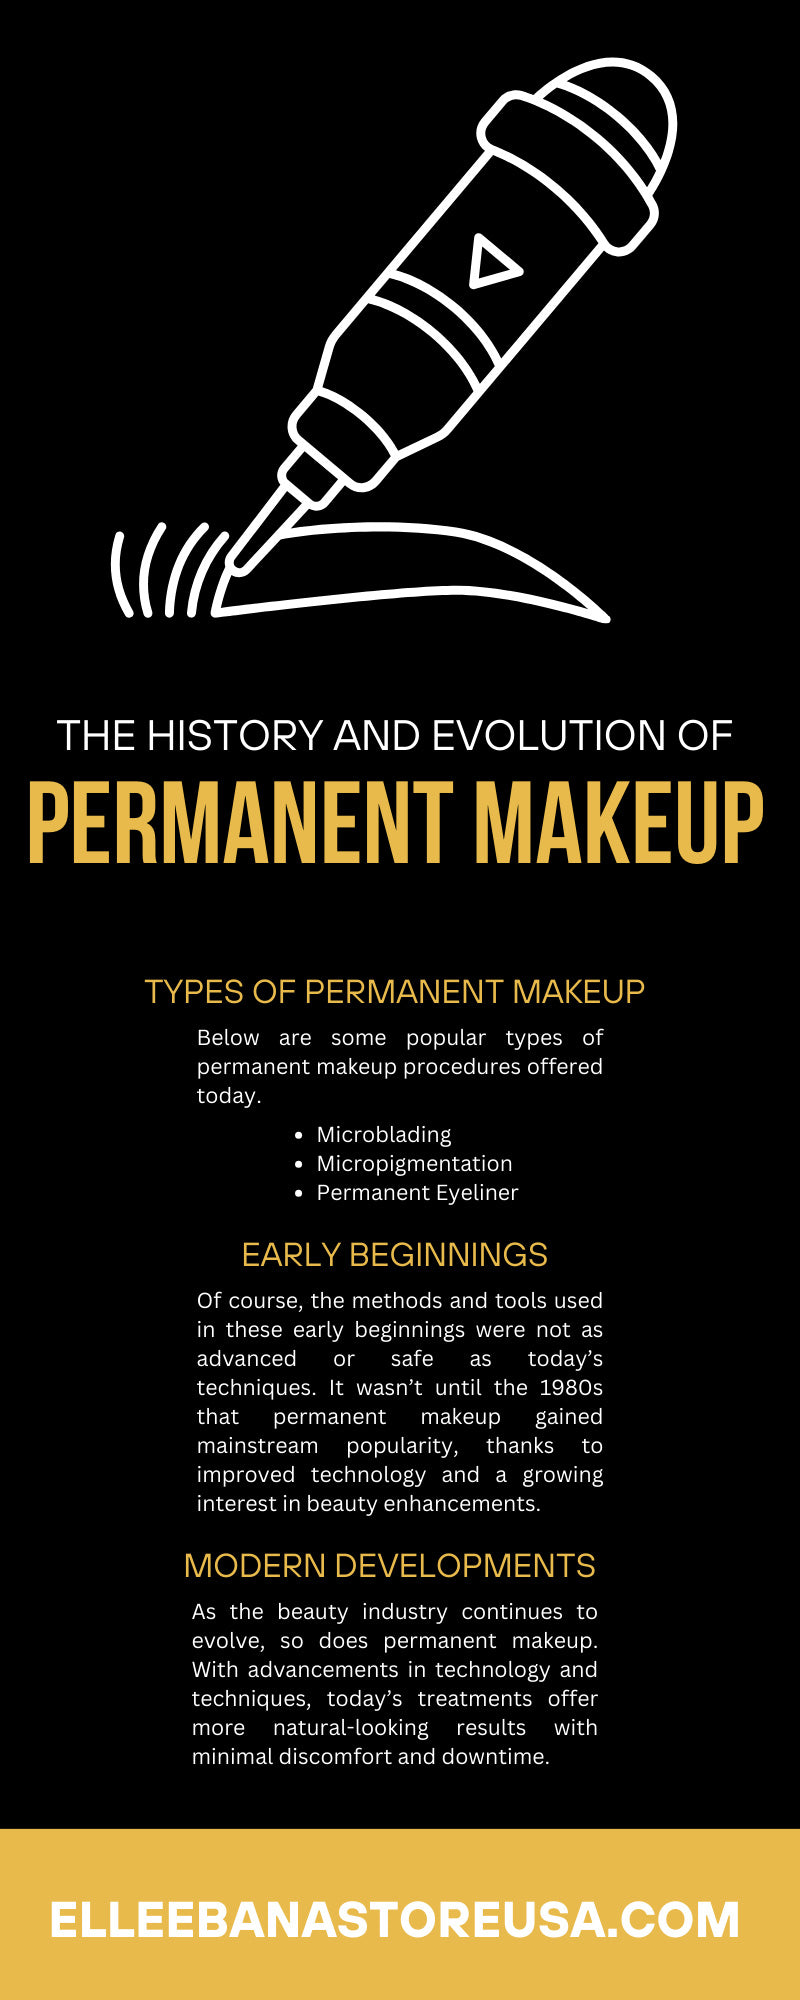 The History and Evolution of Permanent Makeup